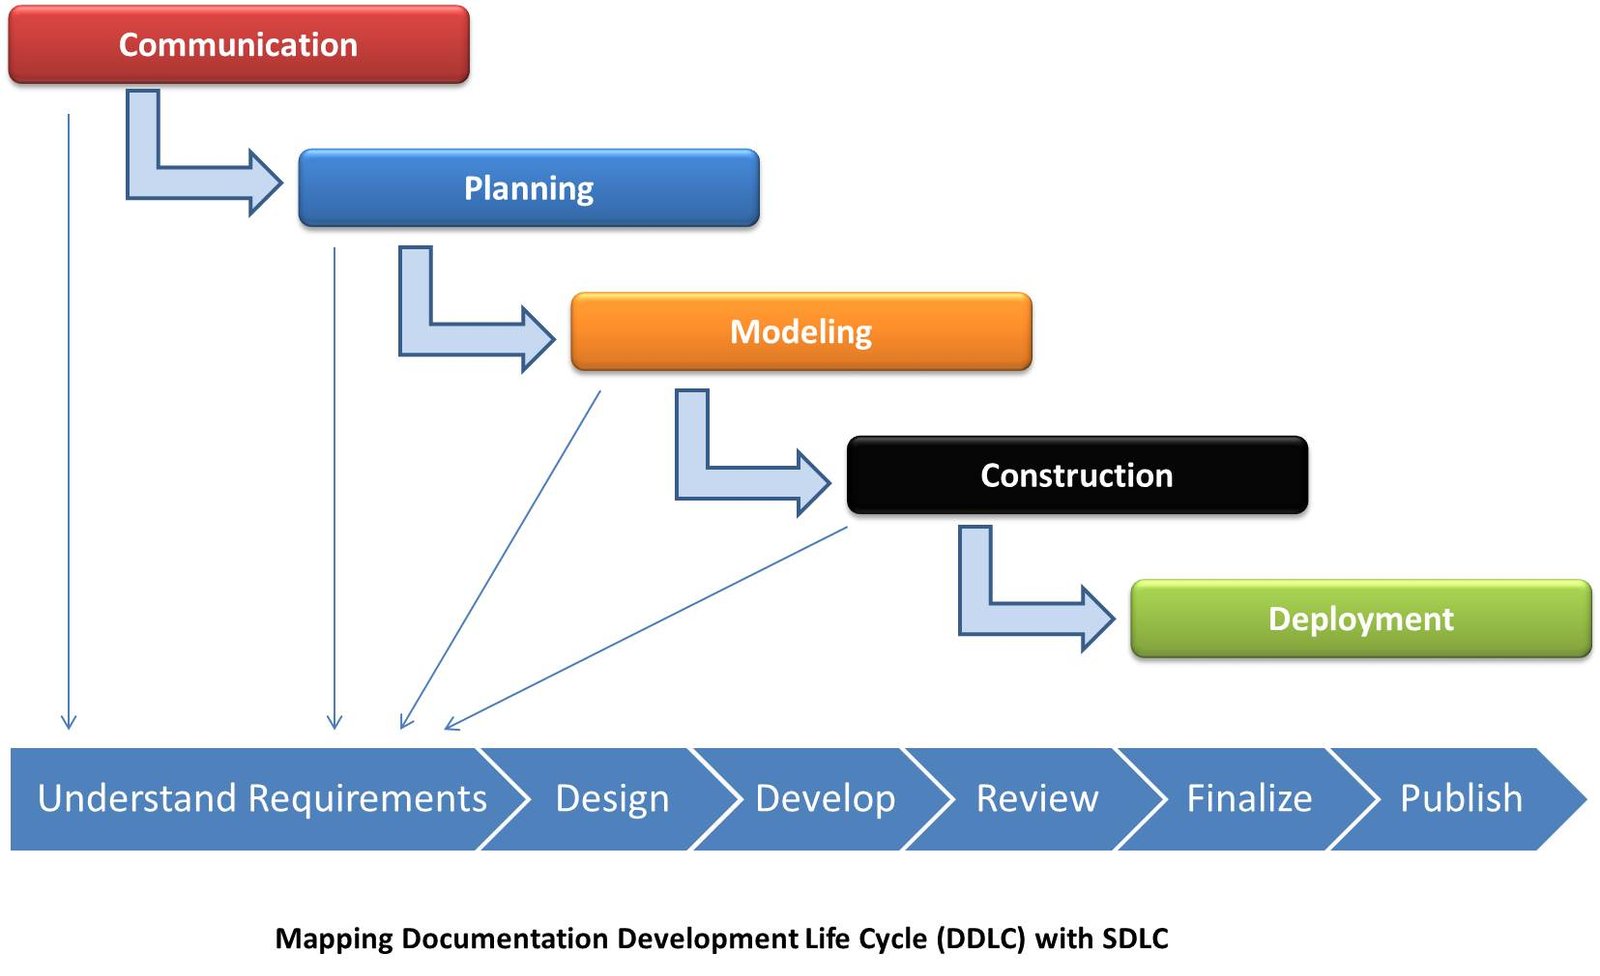 Image depicting the mapping of stages in SDLC and DDLC